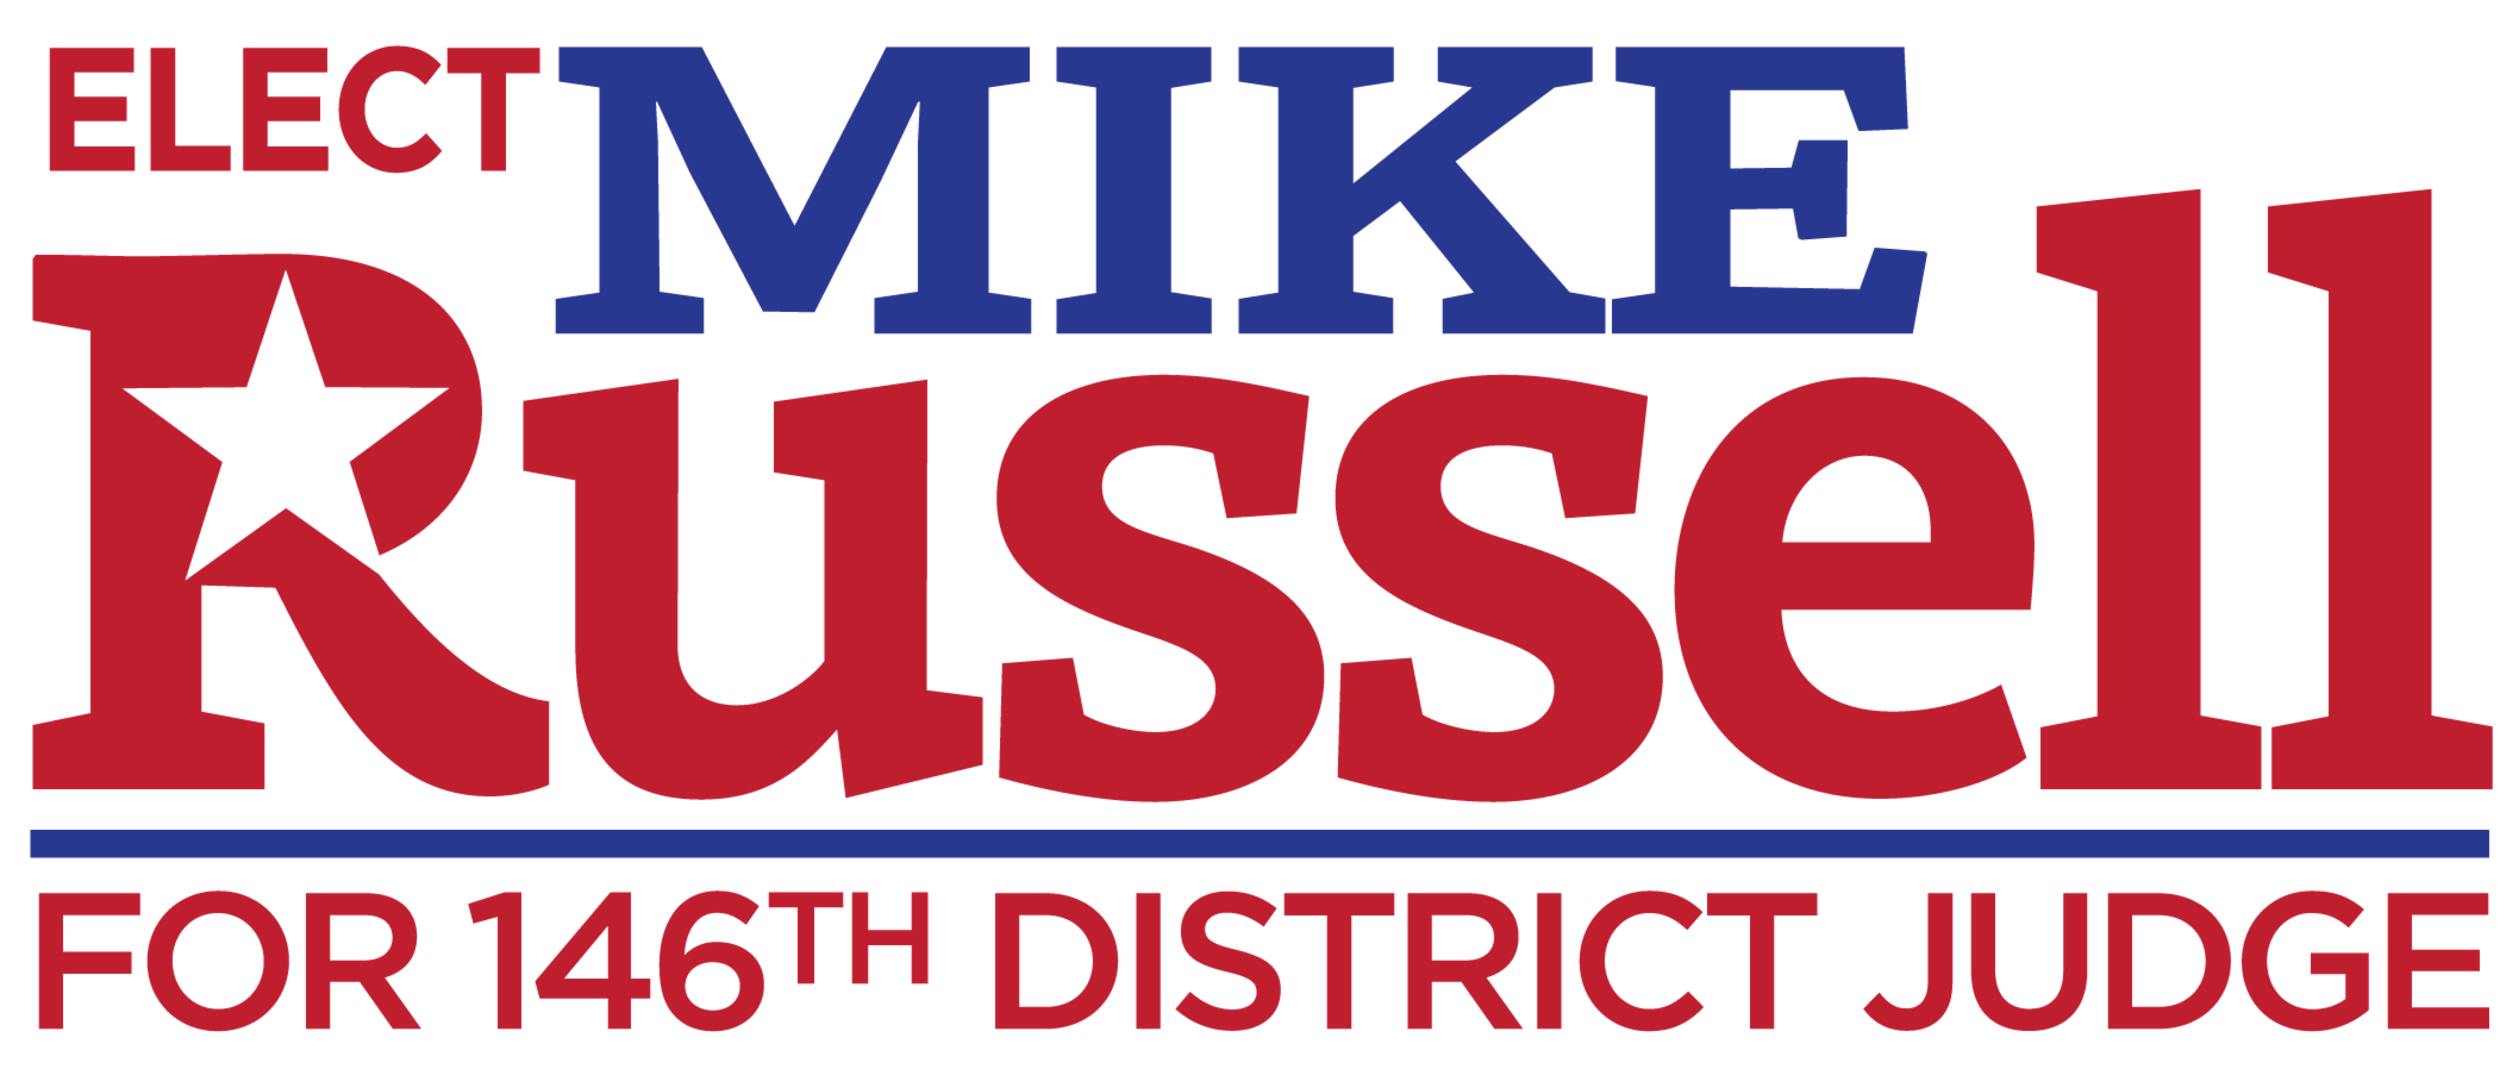 Elect Mike Russell for 146th District Judge